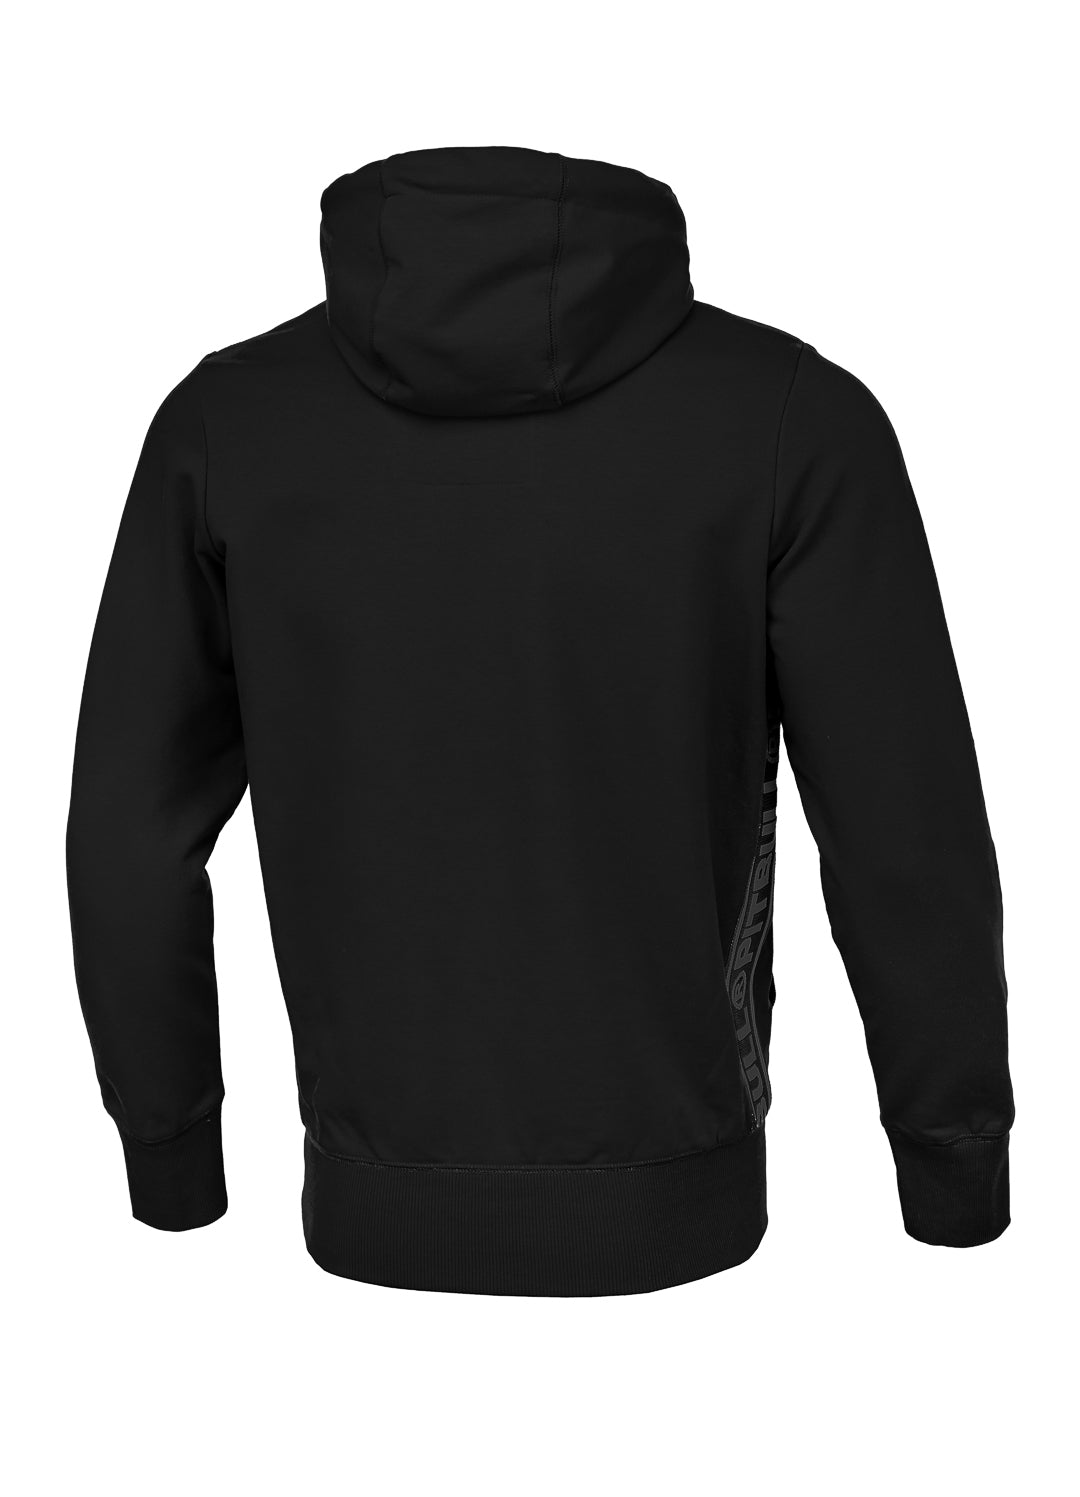 OLYMPIC Black French Terry Hoodie.